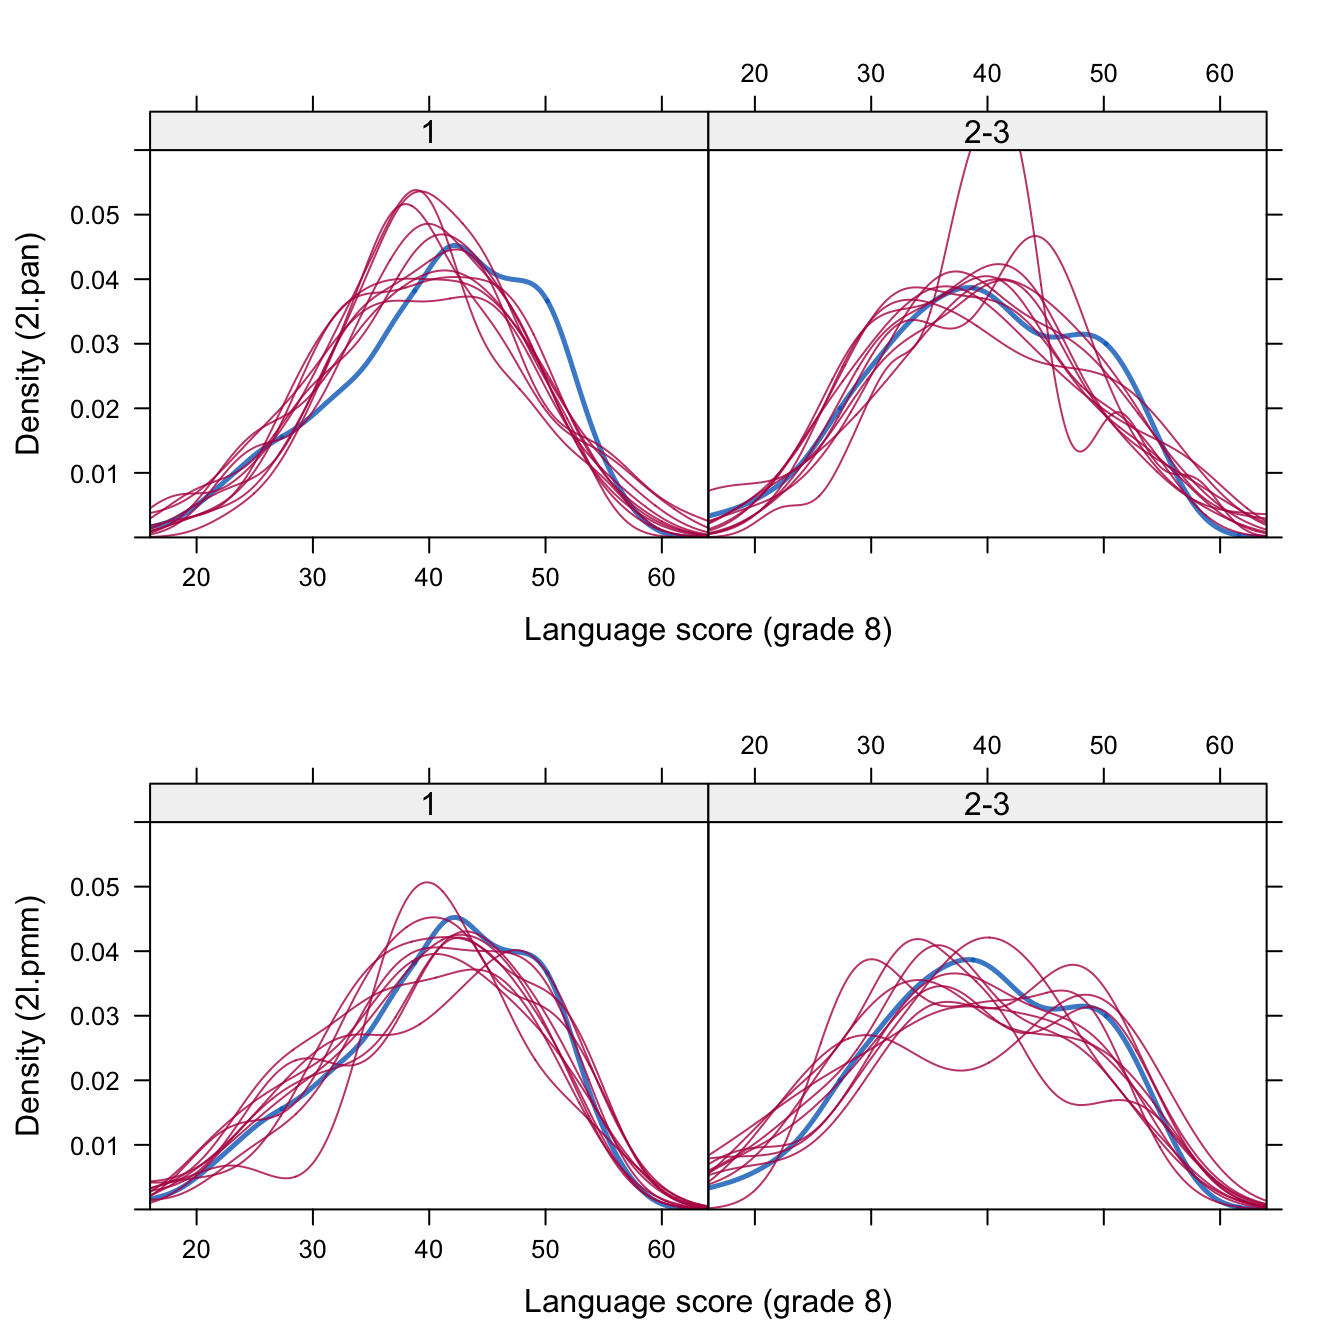 Density plots for schools with one and with two or three missing values for 2l.pan (top) and 2l.pmm (bottom).